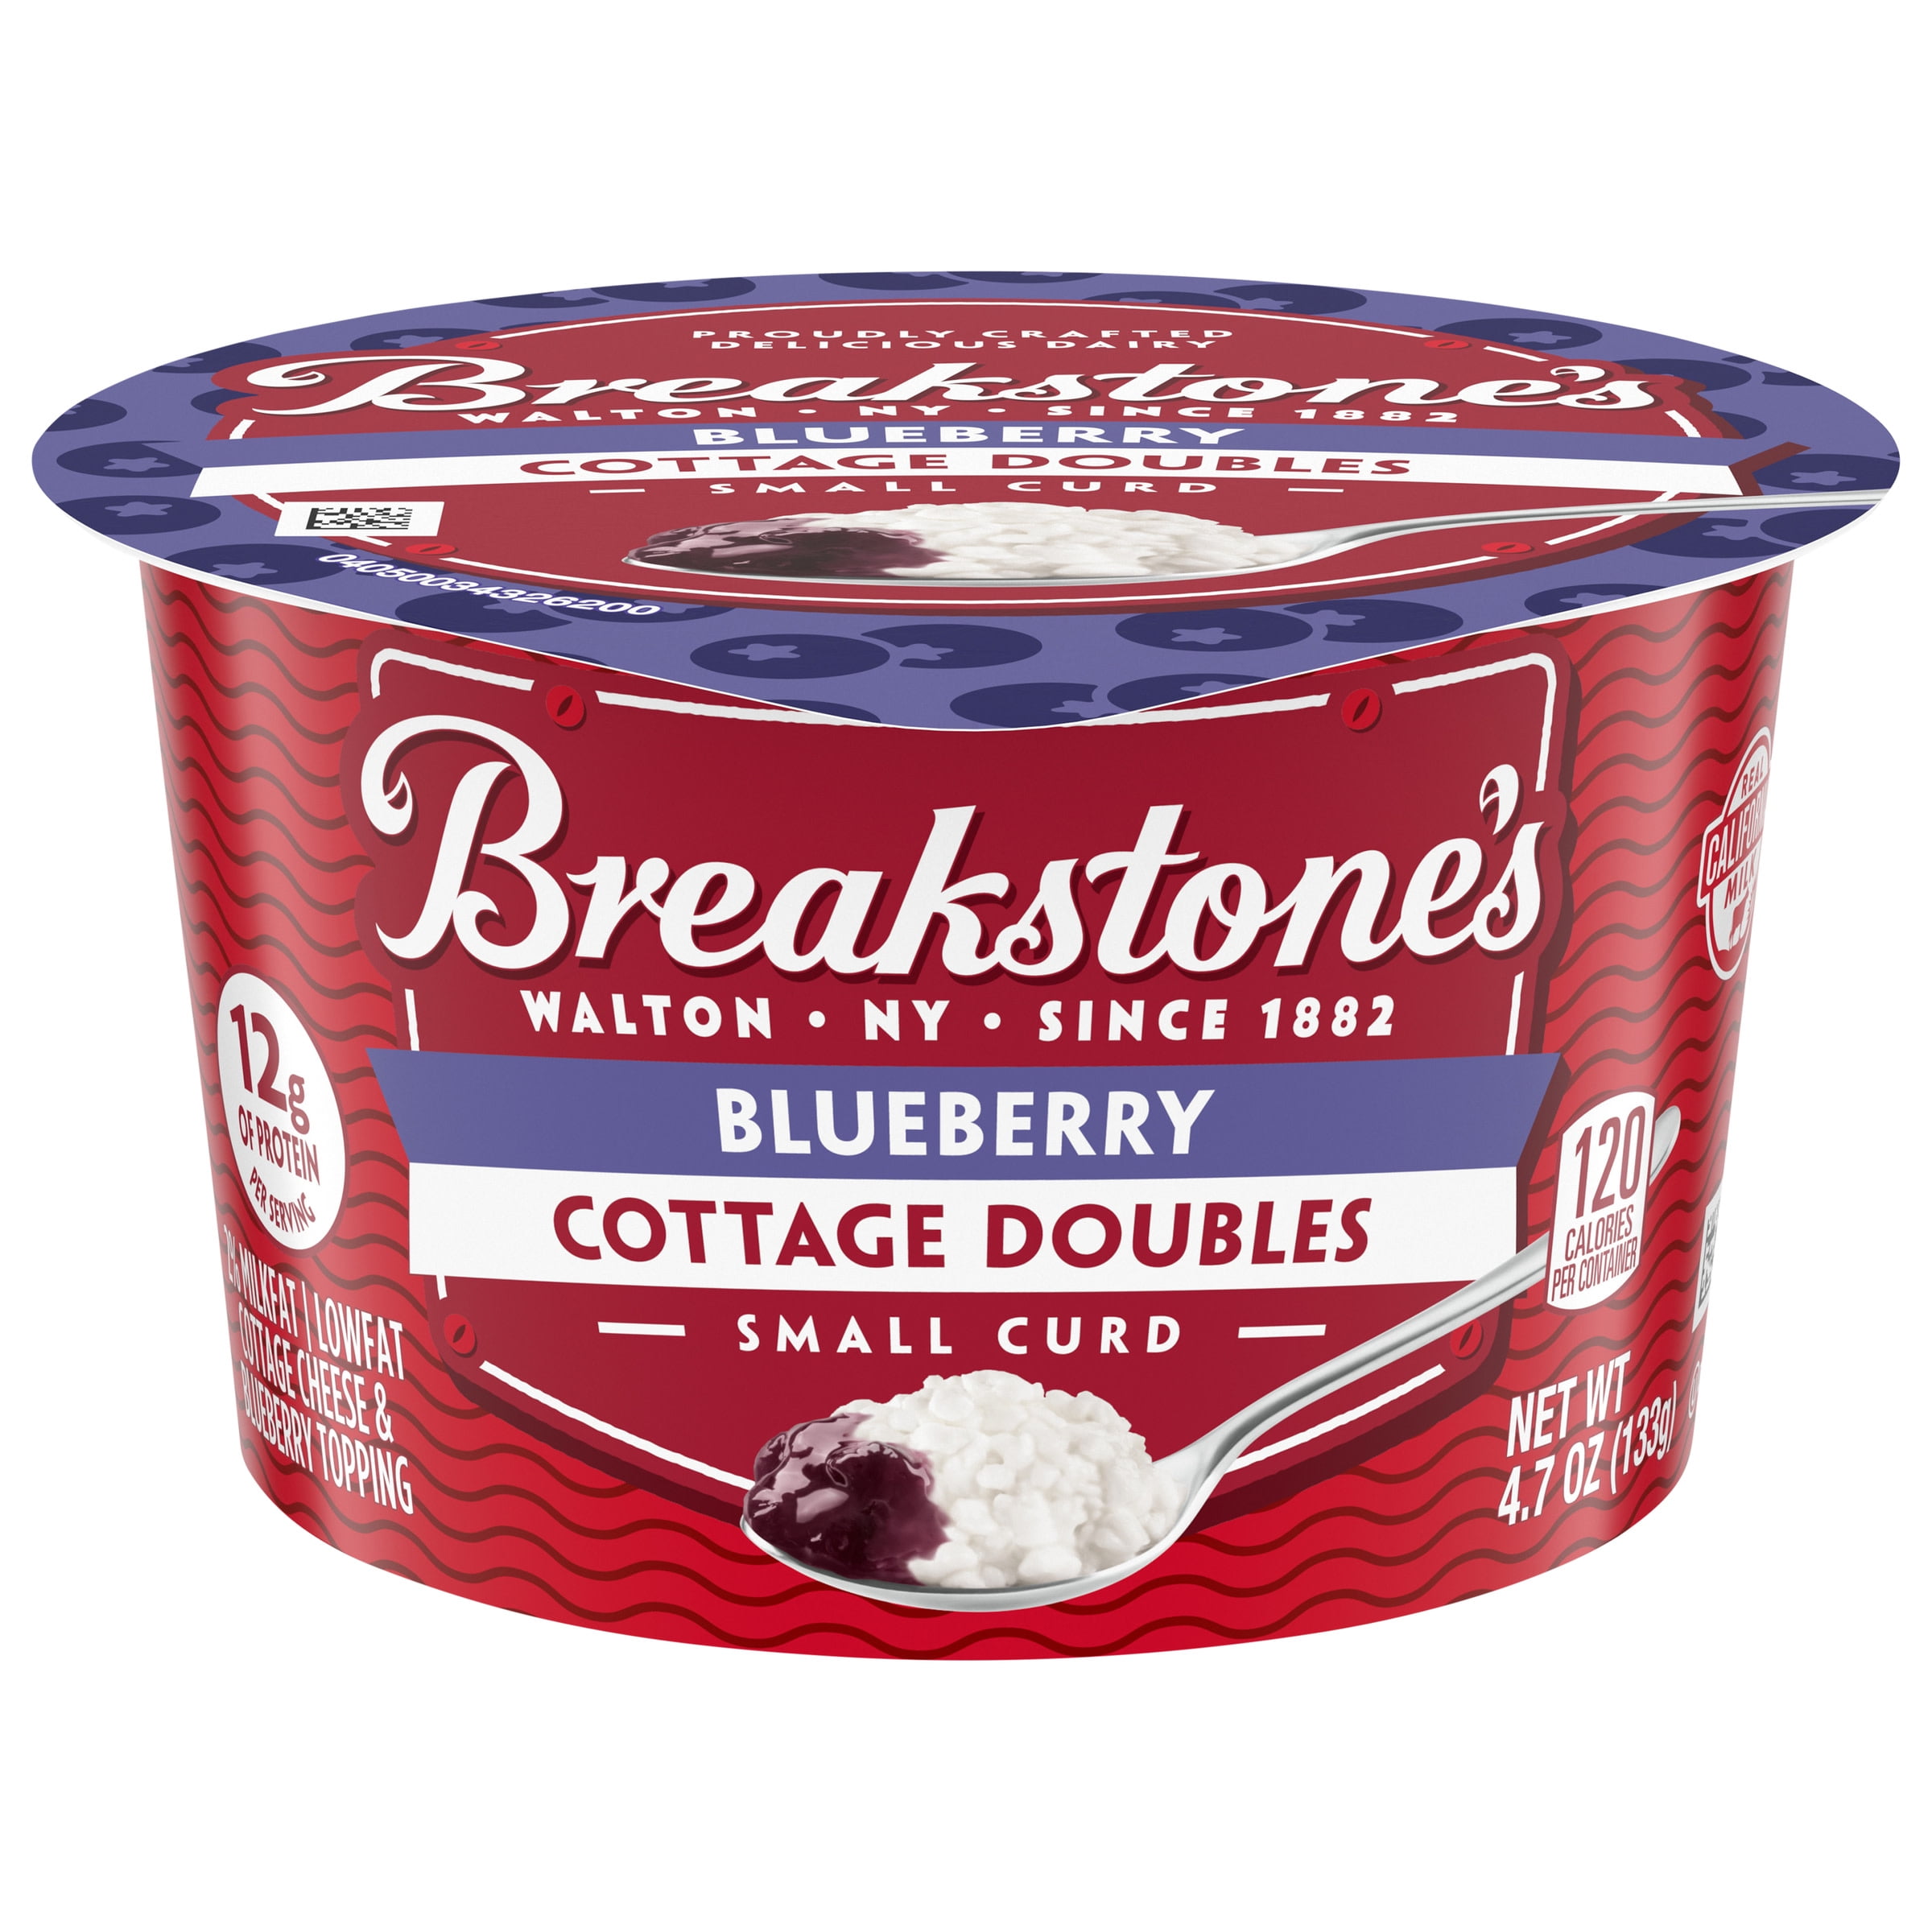 Breakstone's Cottage Doubles Lowfat Cottage Cheese & Blueberry Topping with 2% Milkfat, 4.7 oz Cup